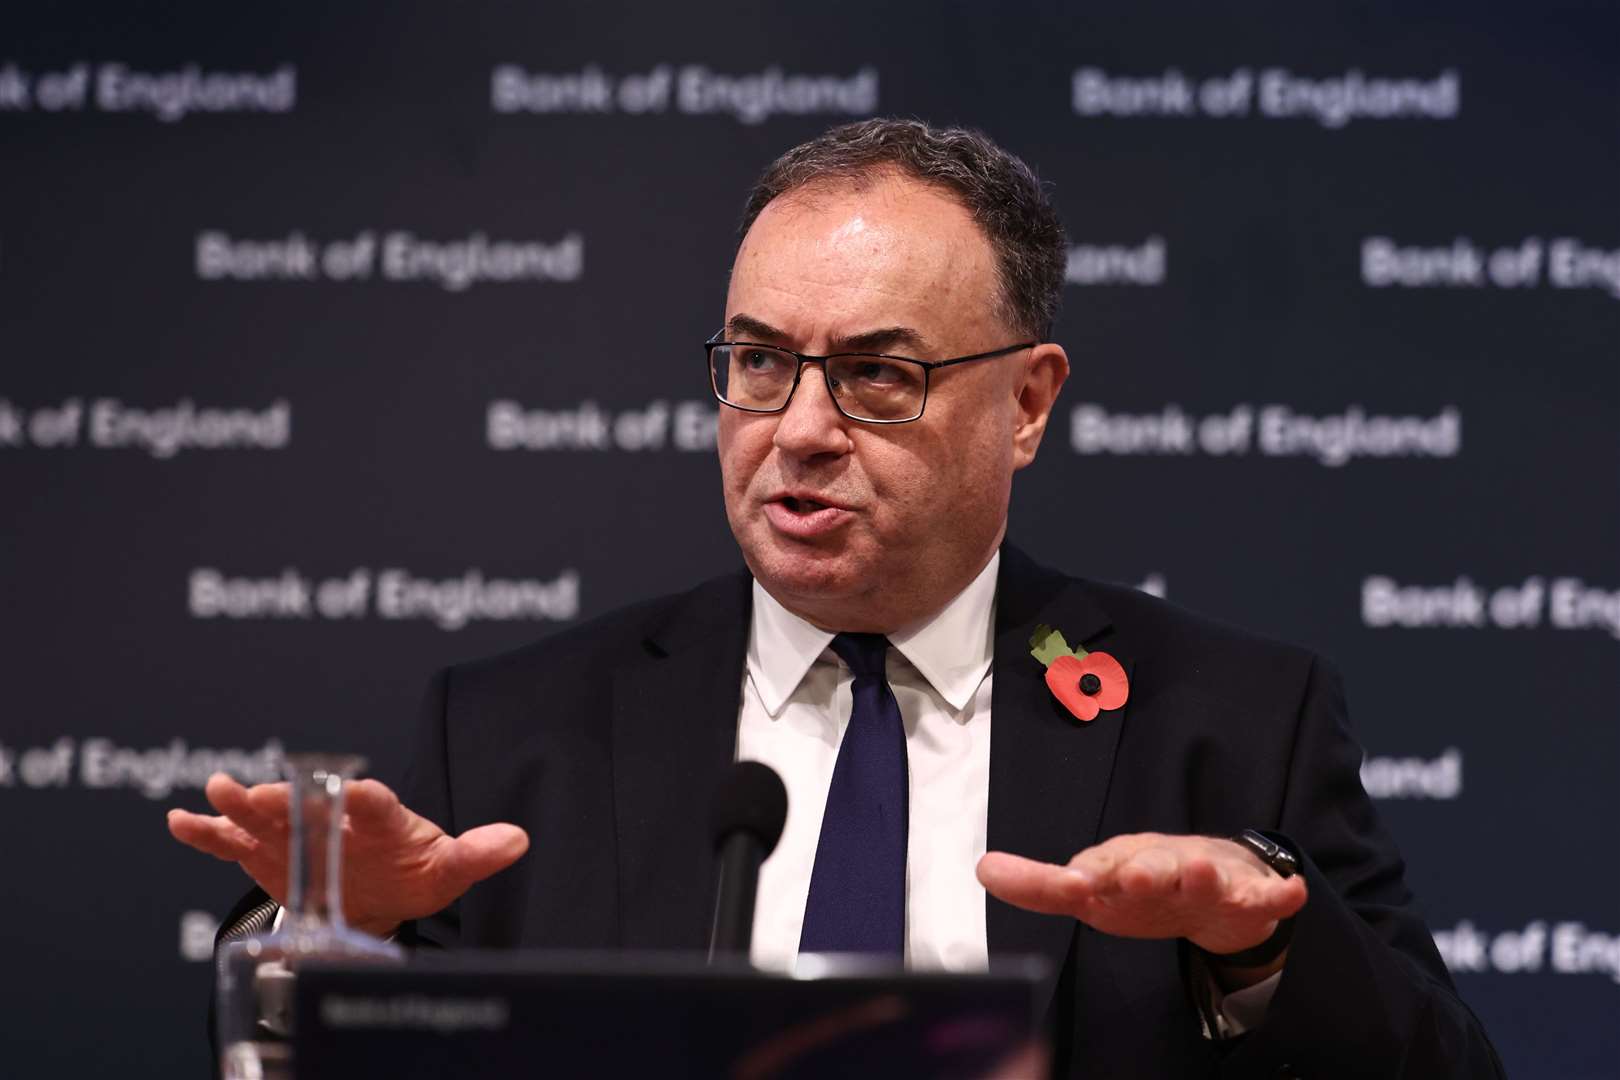 Bank of England governor Andrew Bailey has insisted it is ‘much too early’ for policymakers to think about cutting interest rates (Henry Nicholls/PA)